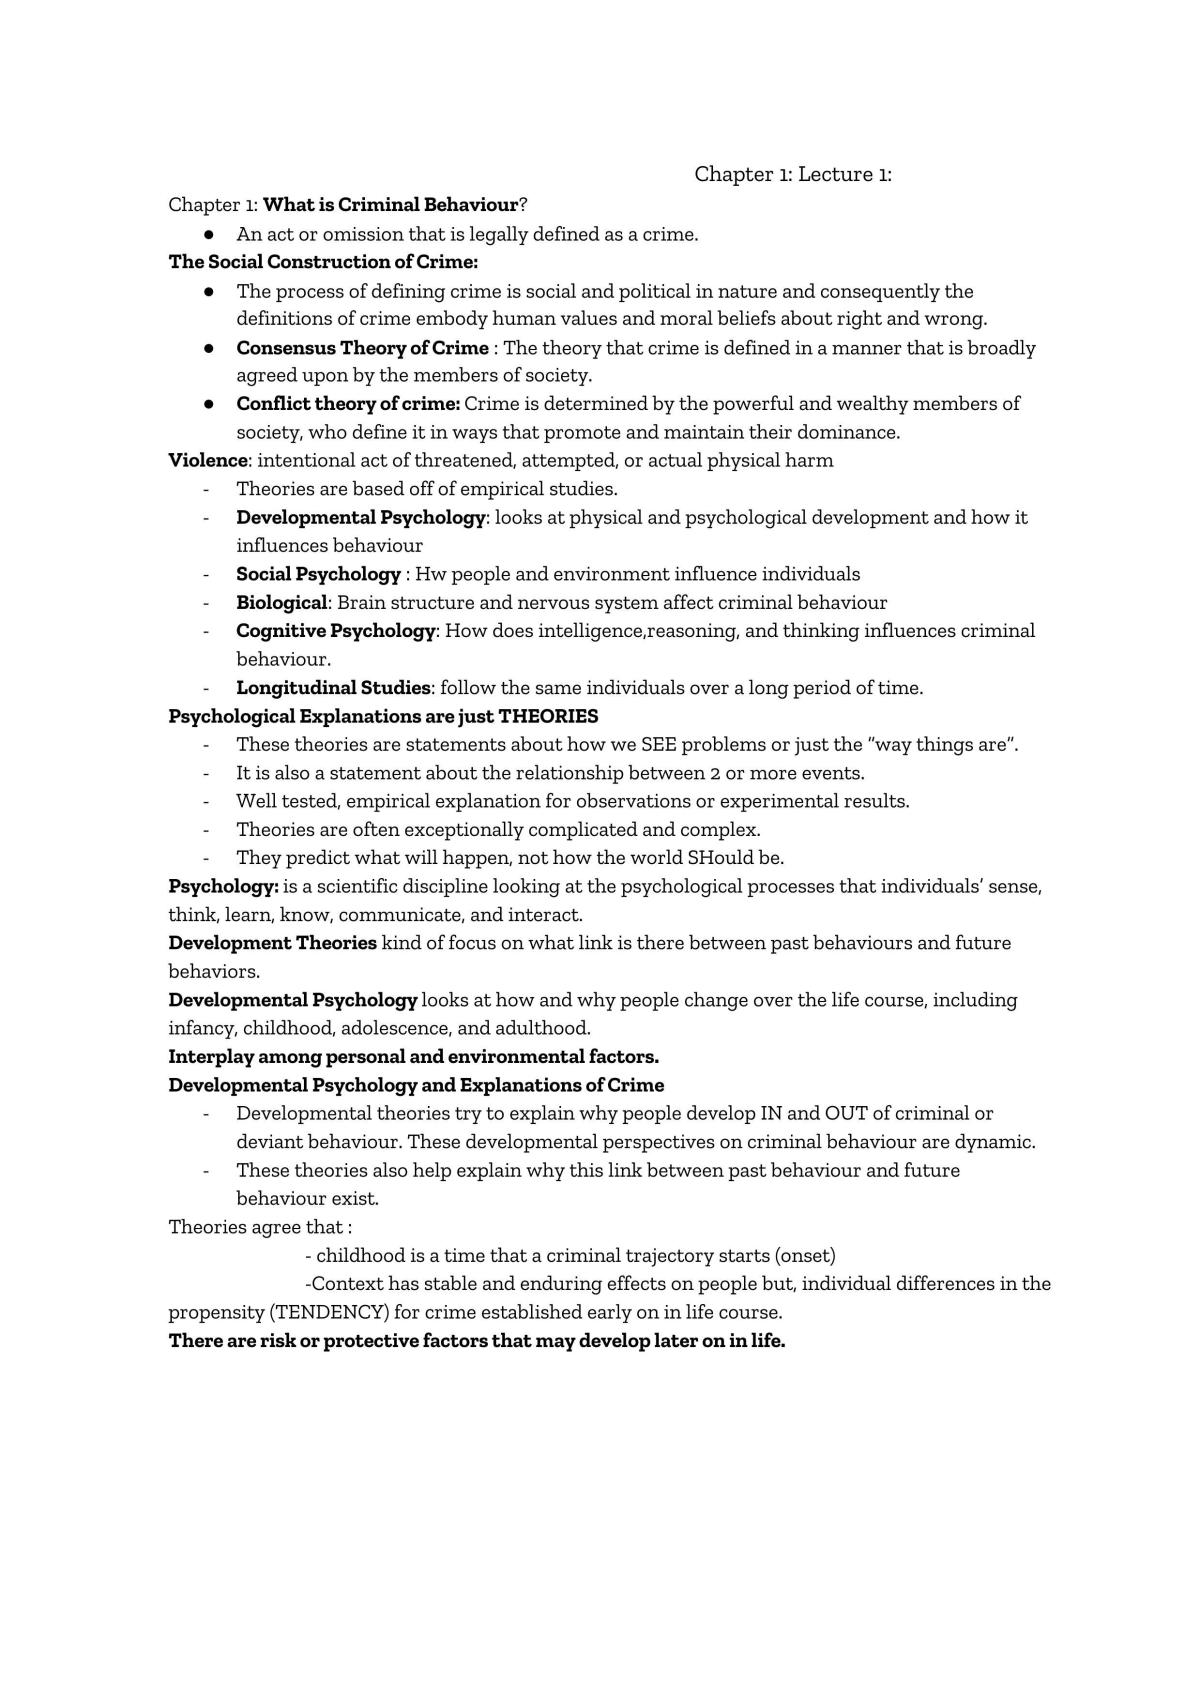 Psychological Explanations of Criminal and Deviant Behavior Study Notes - Page 1